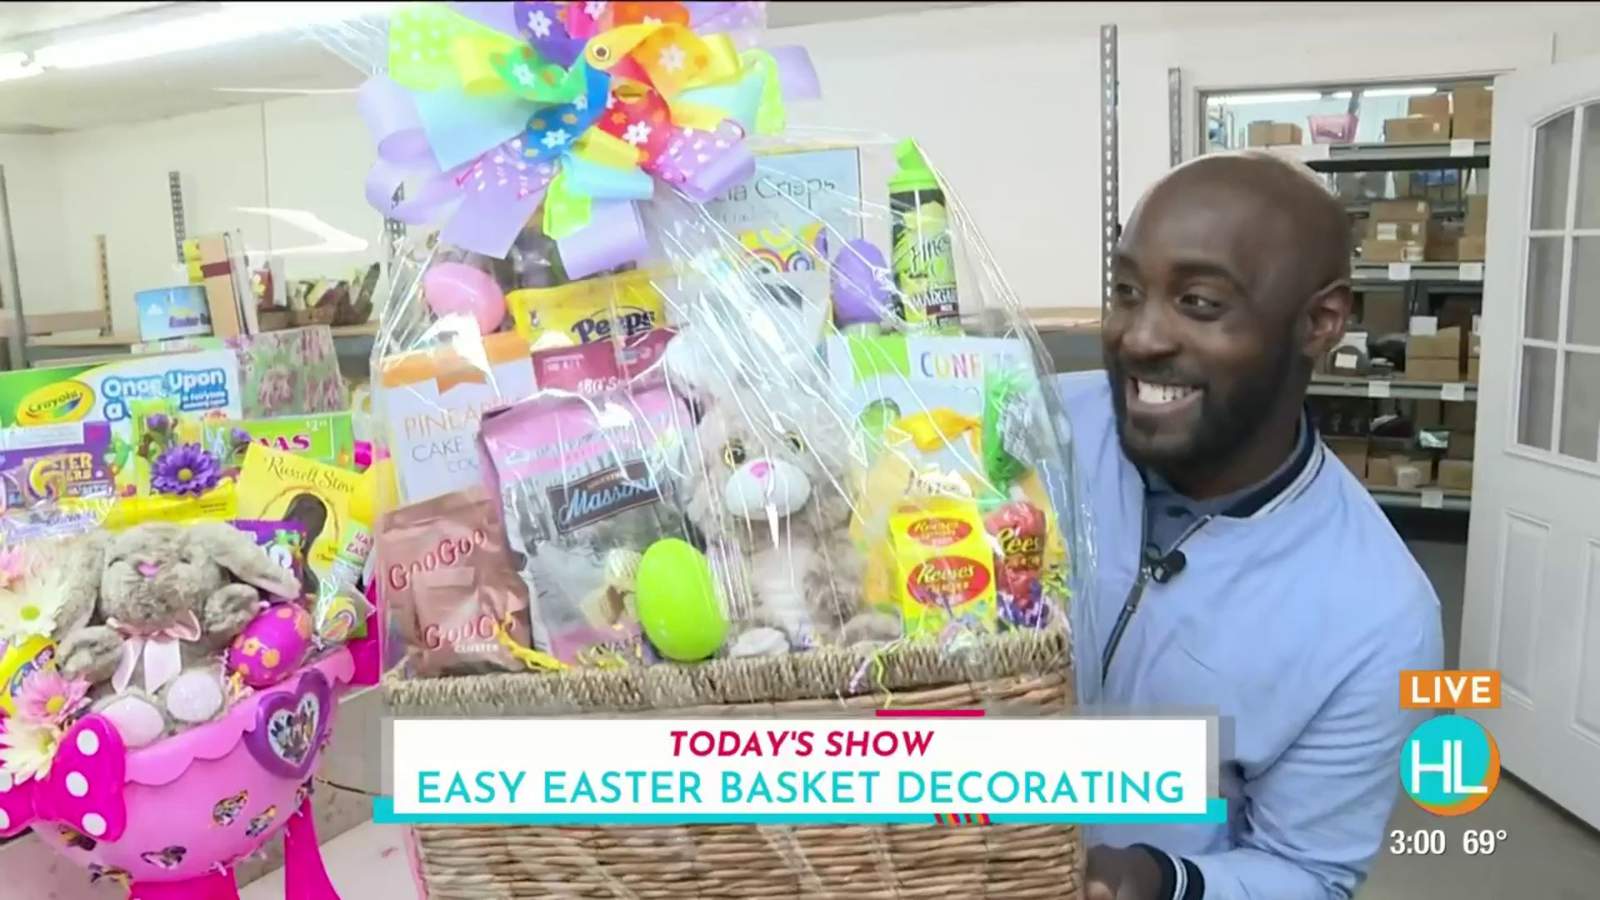 Easy Easter basket decorating that will impress your family and friends